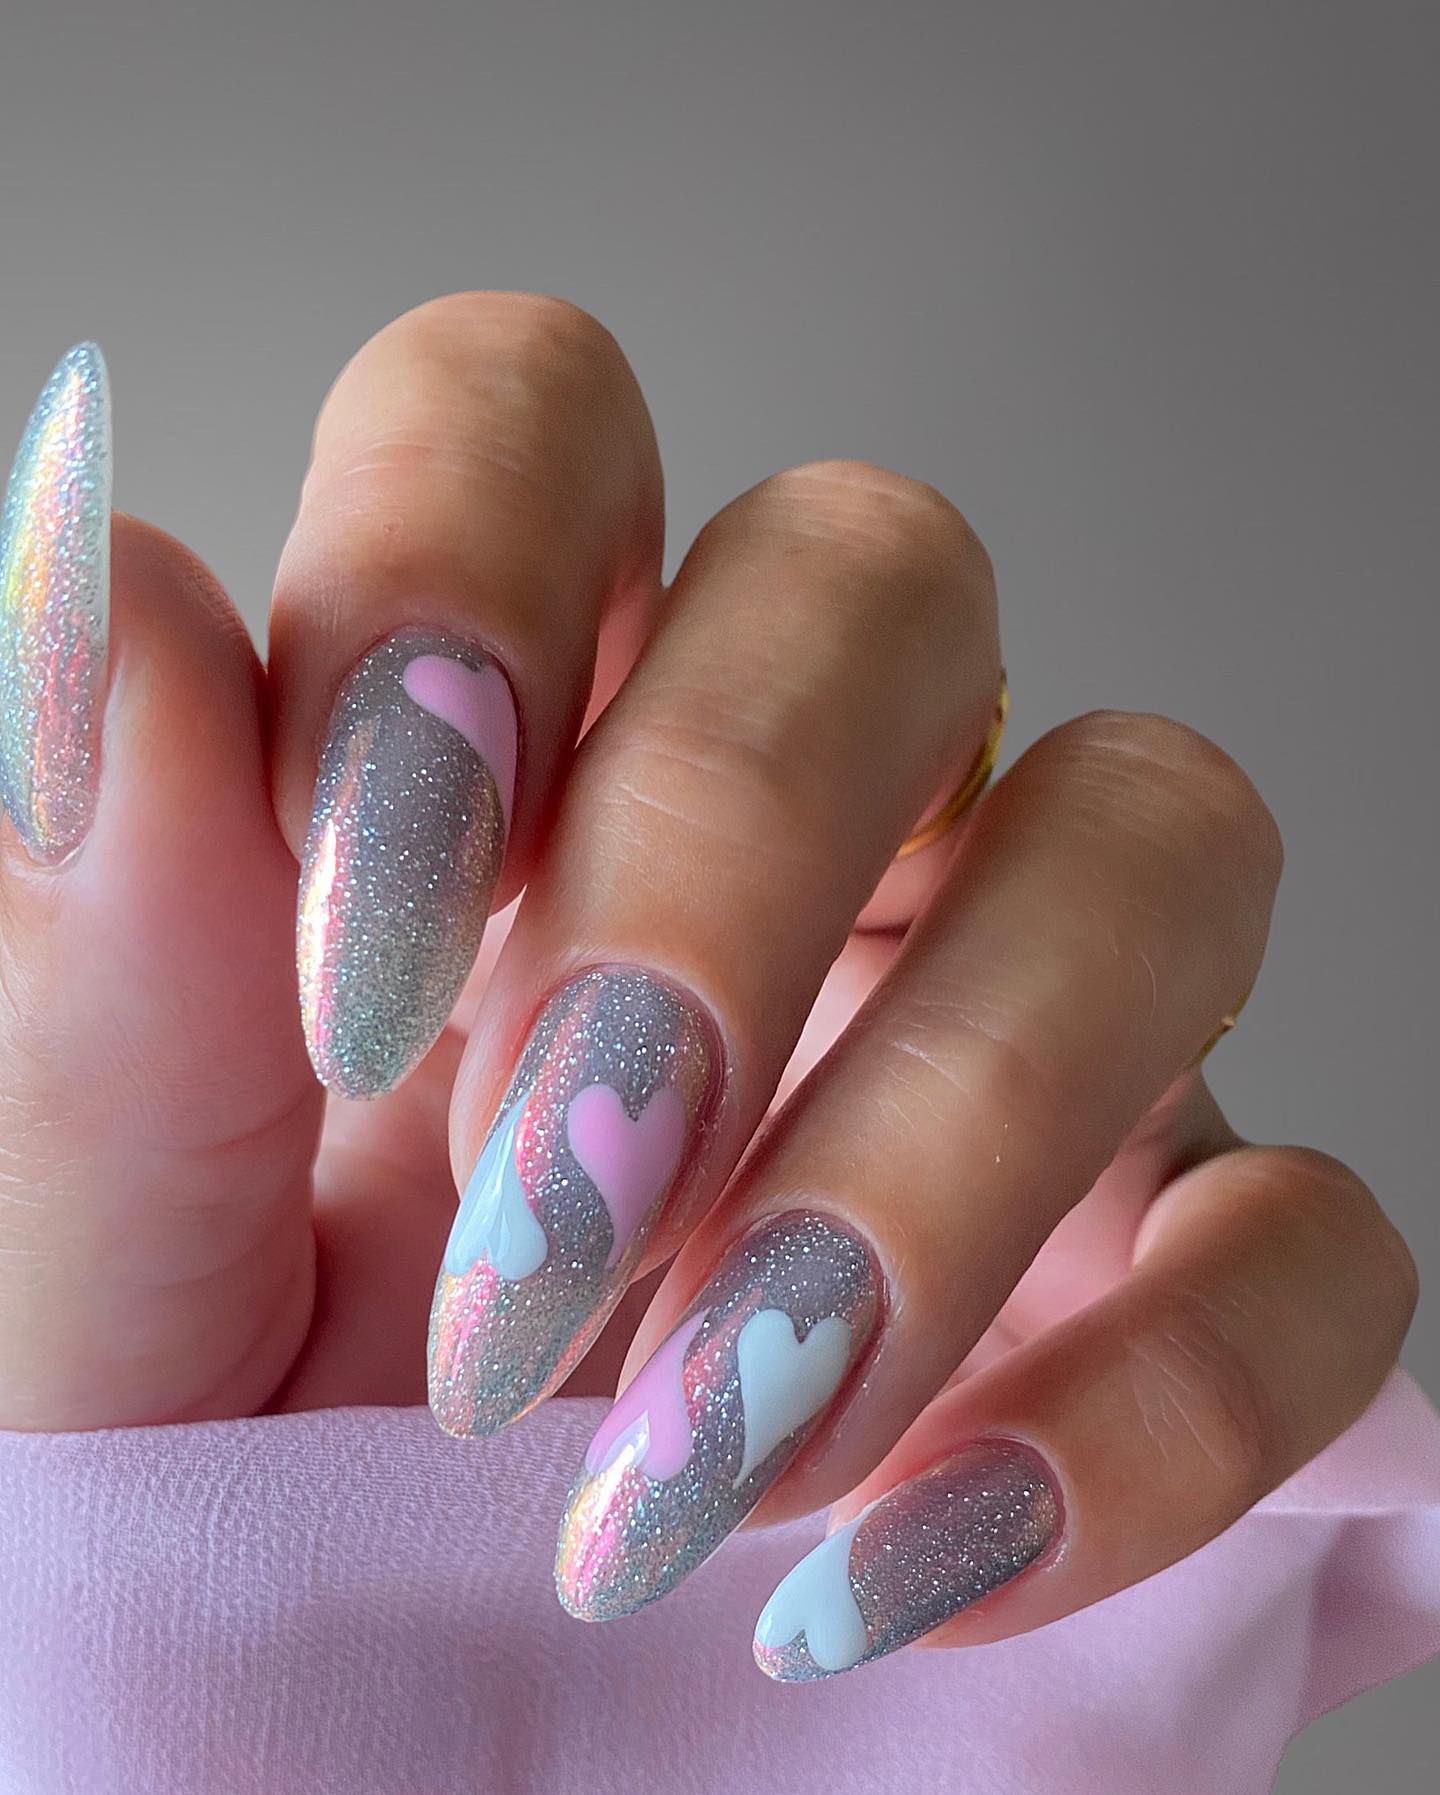 100 Pretty Spring Nail Designs To Try This Year images 6